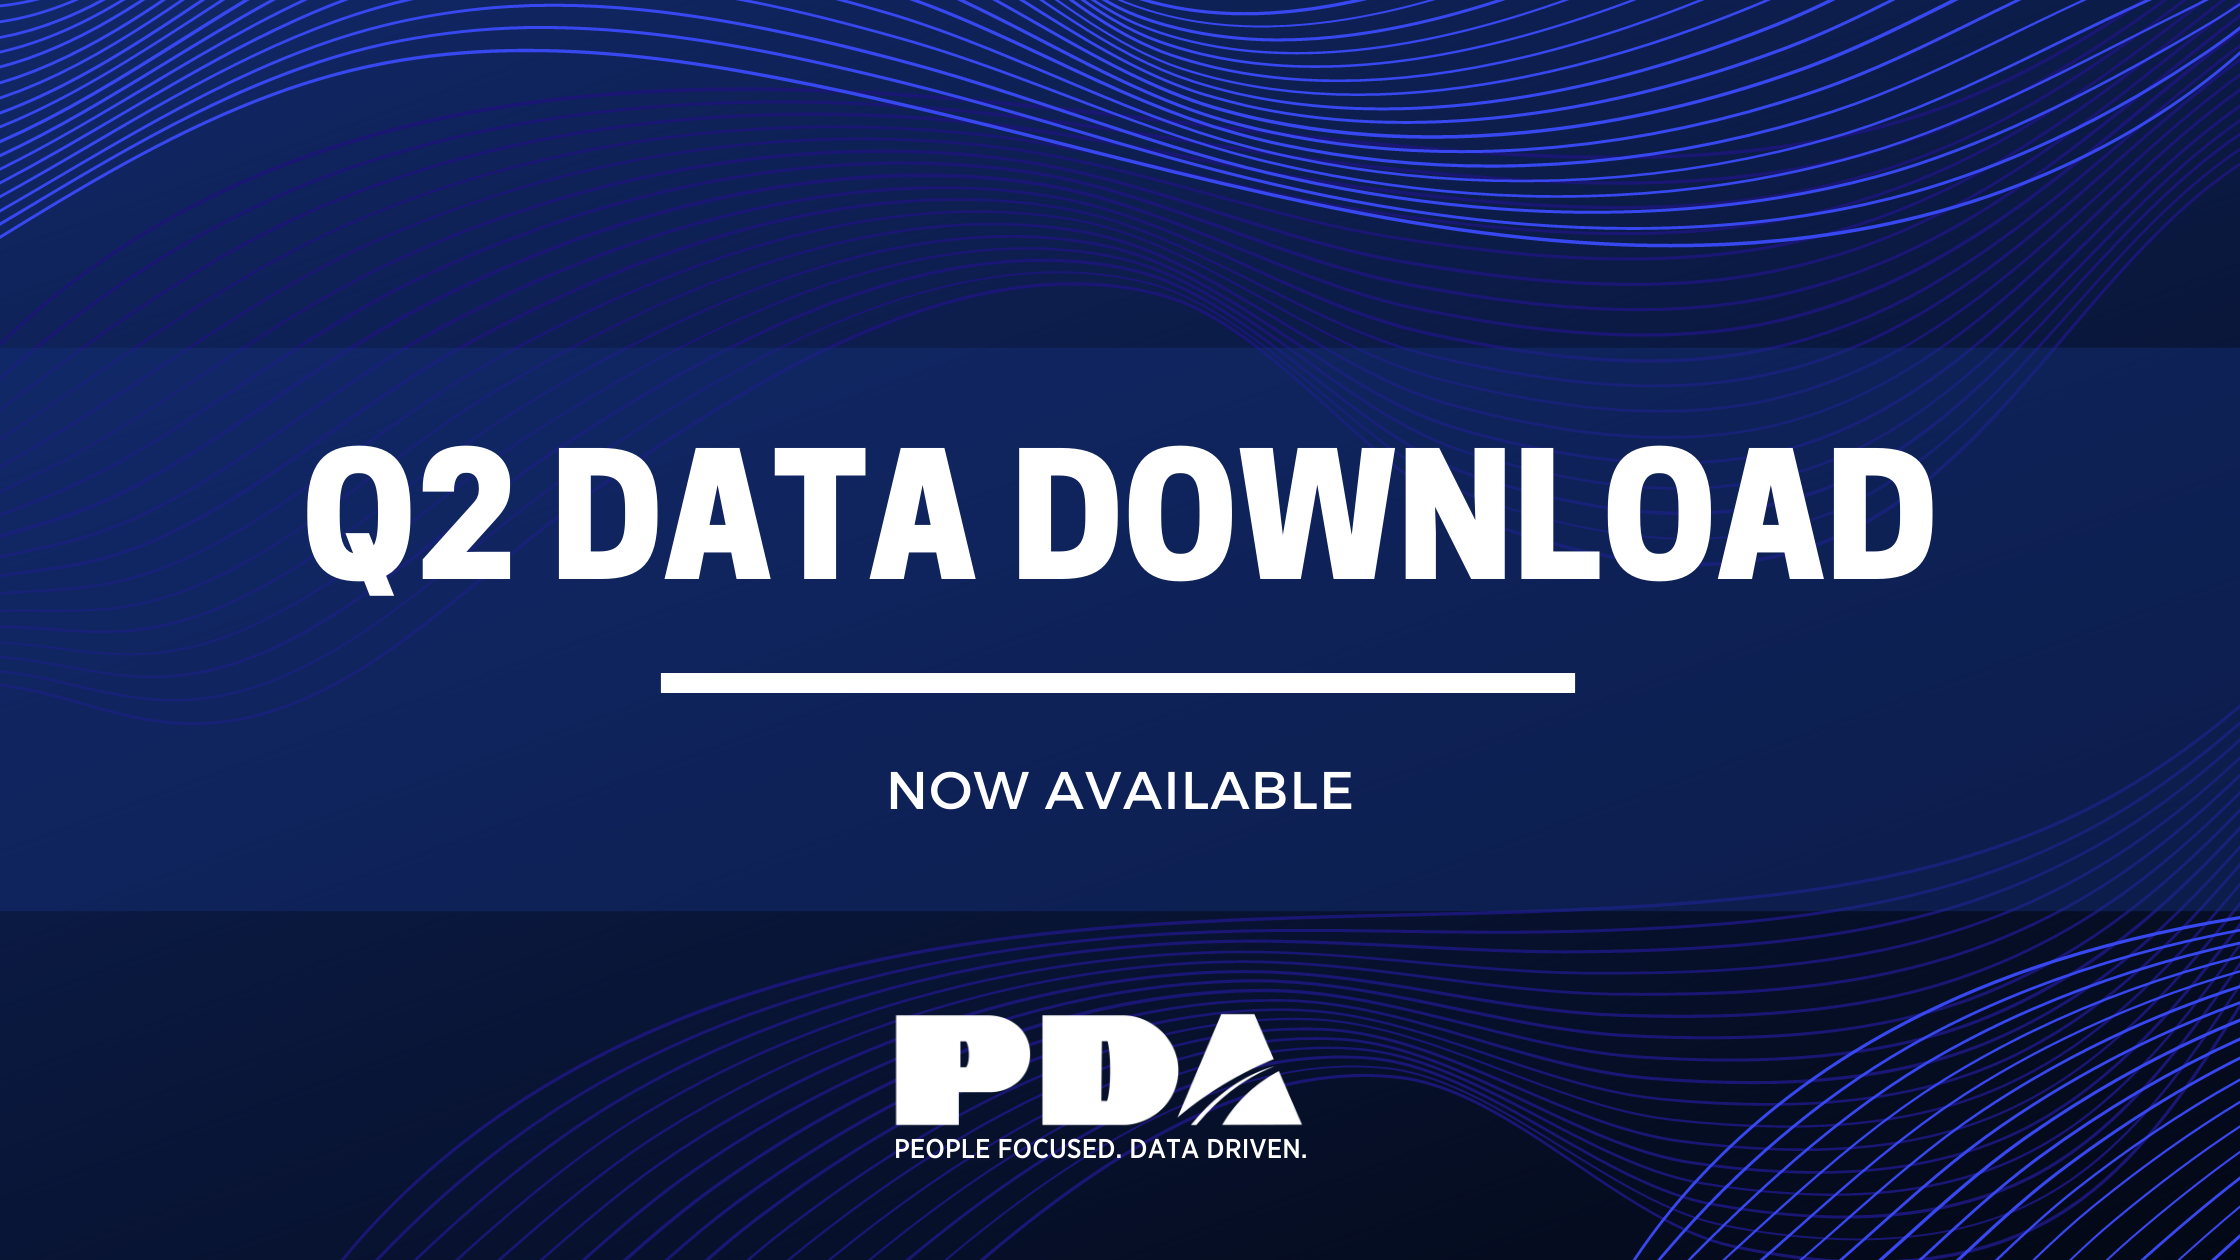 Message Reading: Q2 Data Download from PDA.